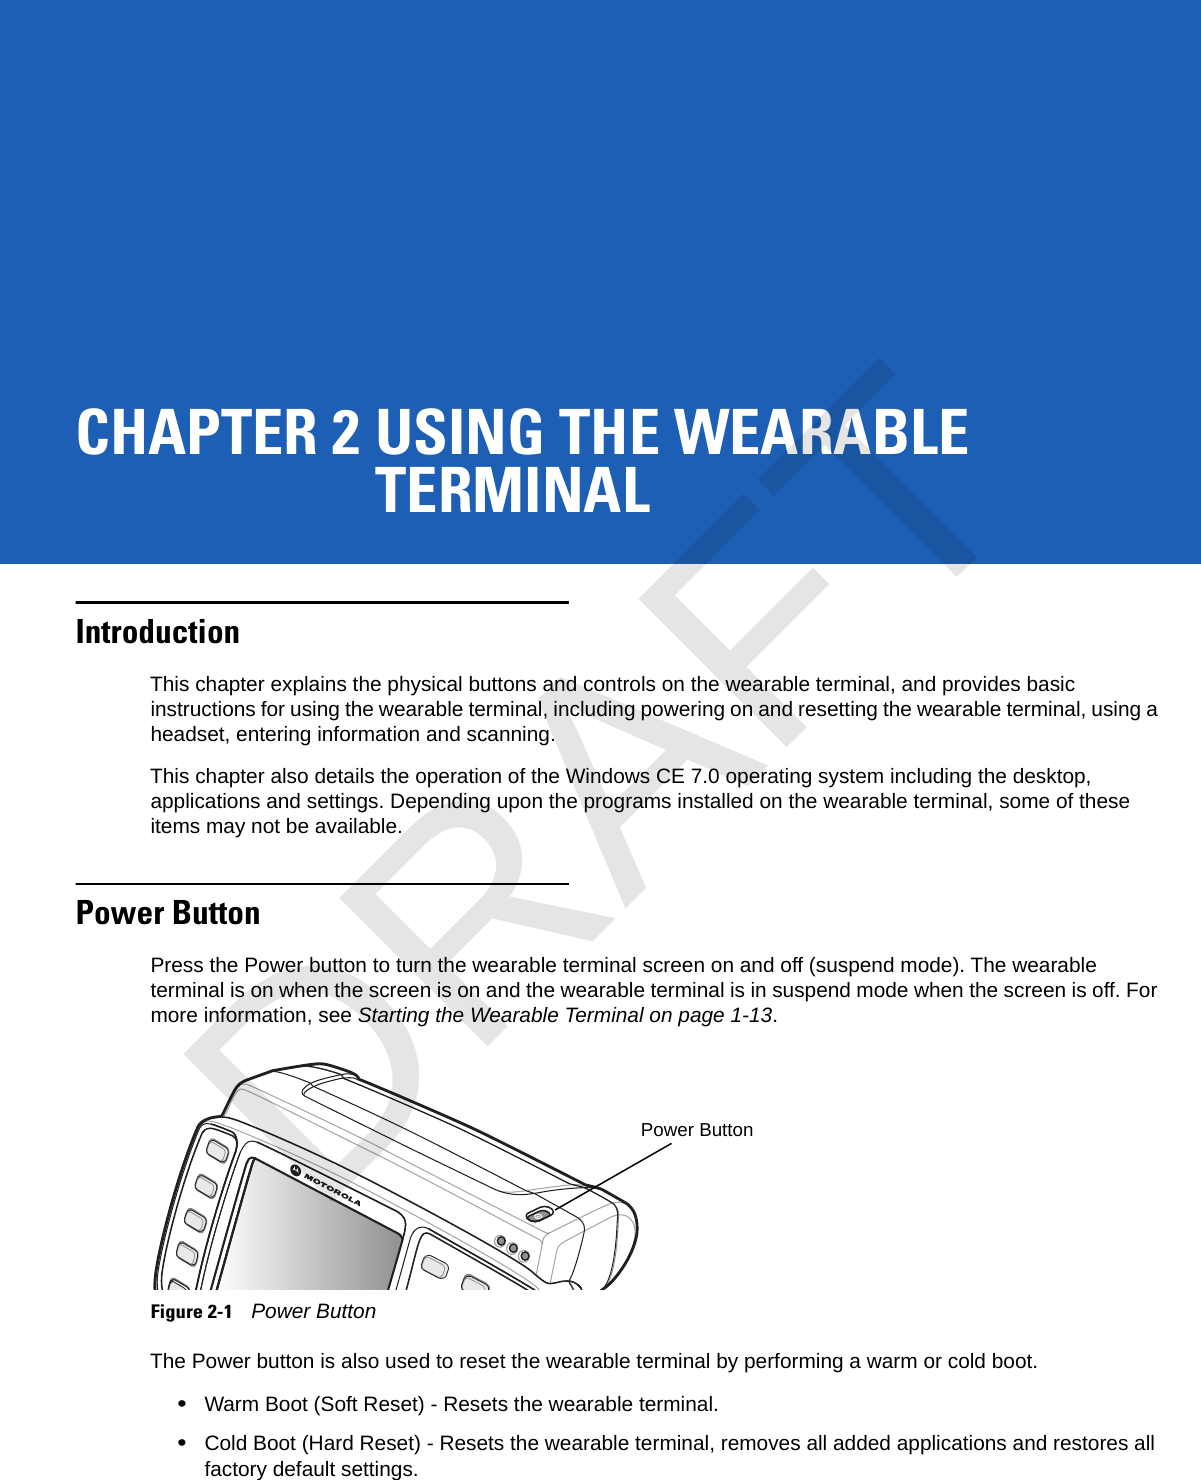 CHAPTER 2 USING THE WEARABLETERMINALIntroductionThis chapter explains the physical buttons and controls on the wearable terminal, and provides basic instructions for using the wearable terminal, including powering on and resetting the wearable terminal, using a headset, entering information and scanning.This chapter also details the operation of the Windows CE 7.0 operating system including the desktop, applications and settings. Depending upon the programs installed on the wearable terminal, some of these items may not be available.Power ButtonPress the Power button to turn the wearable terminal screen on and off (suspend mode). The wearable terminal is on when the screen is on and the wearable terminal is in suspend mode when the screen is off. For more information, see Starting the Wearable Terminal on page 1-13.Figure 2-1Power ButtonThe Power button is also used to reset the wearable terminal by performing a warm or cold boot.•Warm Boot (Soft Reset) - Resets the wearable terminal.•Cold Boot (Hard Reset) - Resets the wearable terminal, removes all added applications and restores all factory default settings.Power ButtonDRAFT